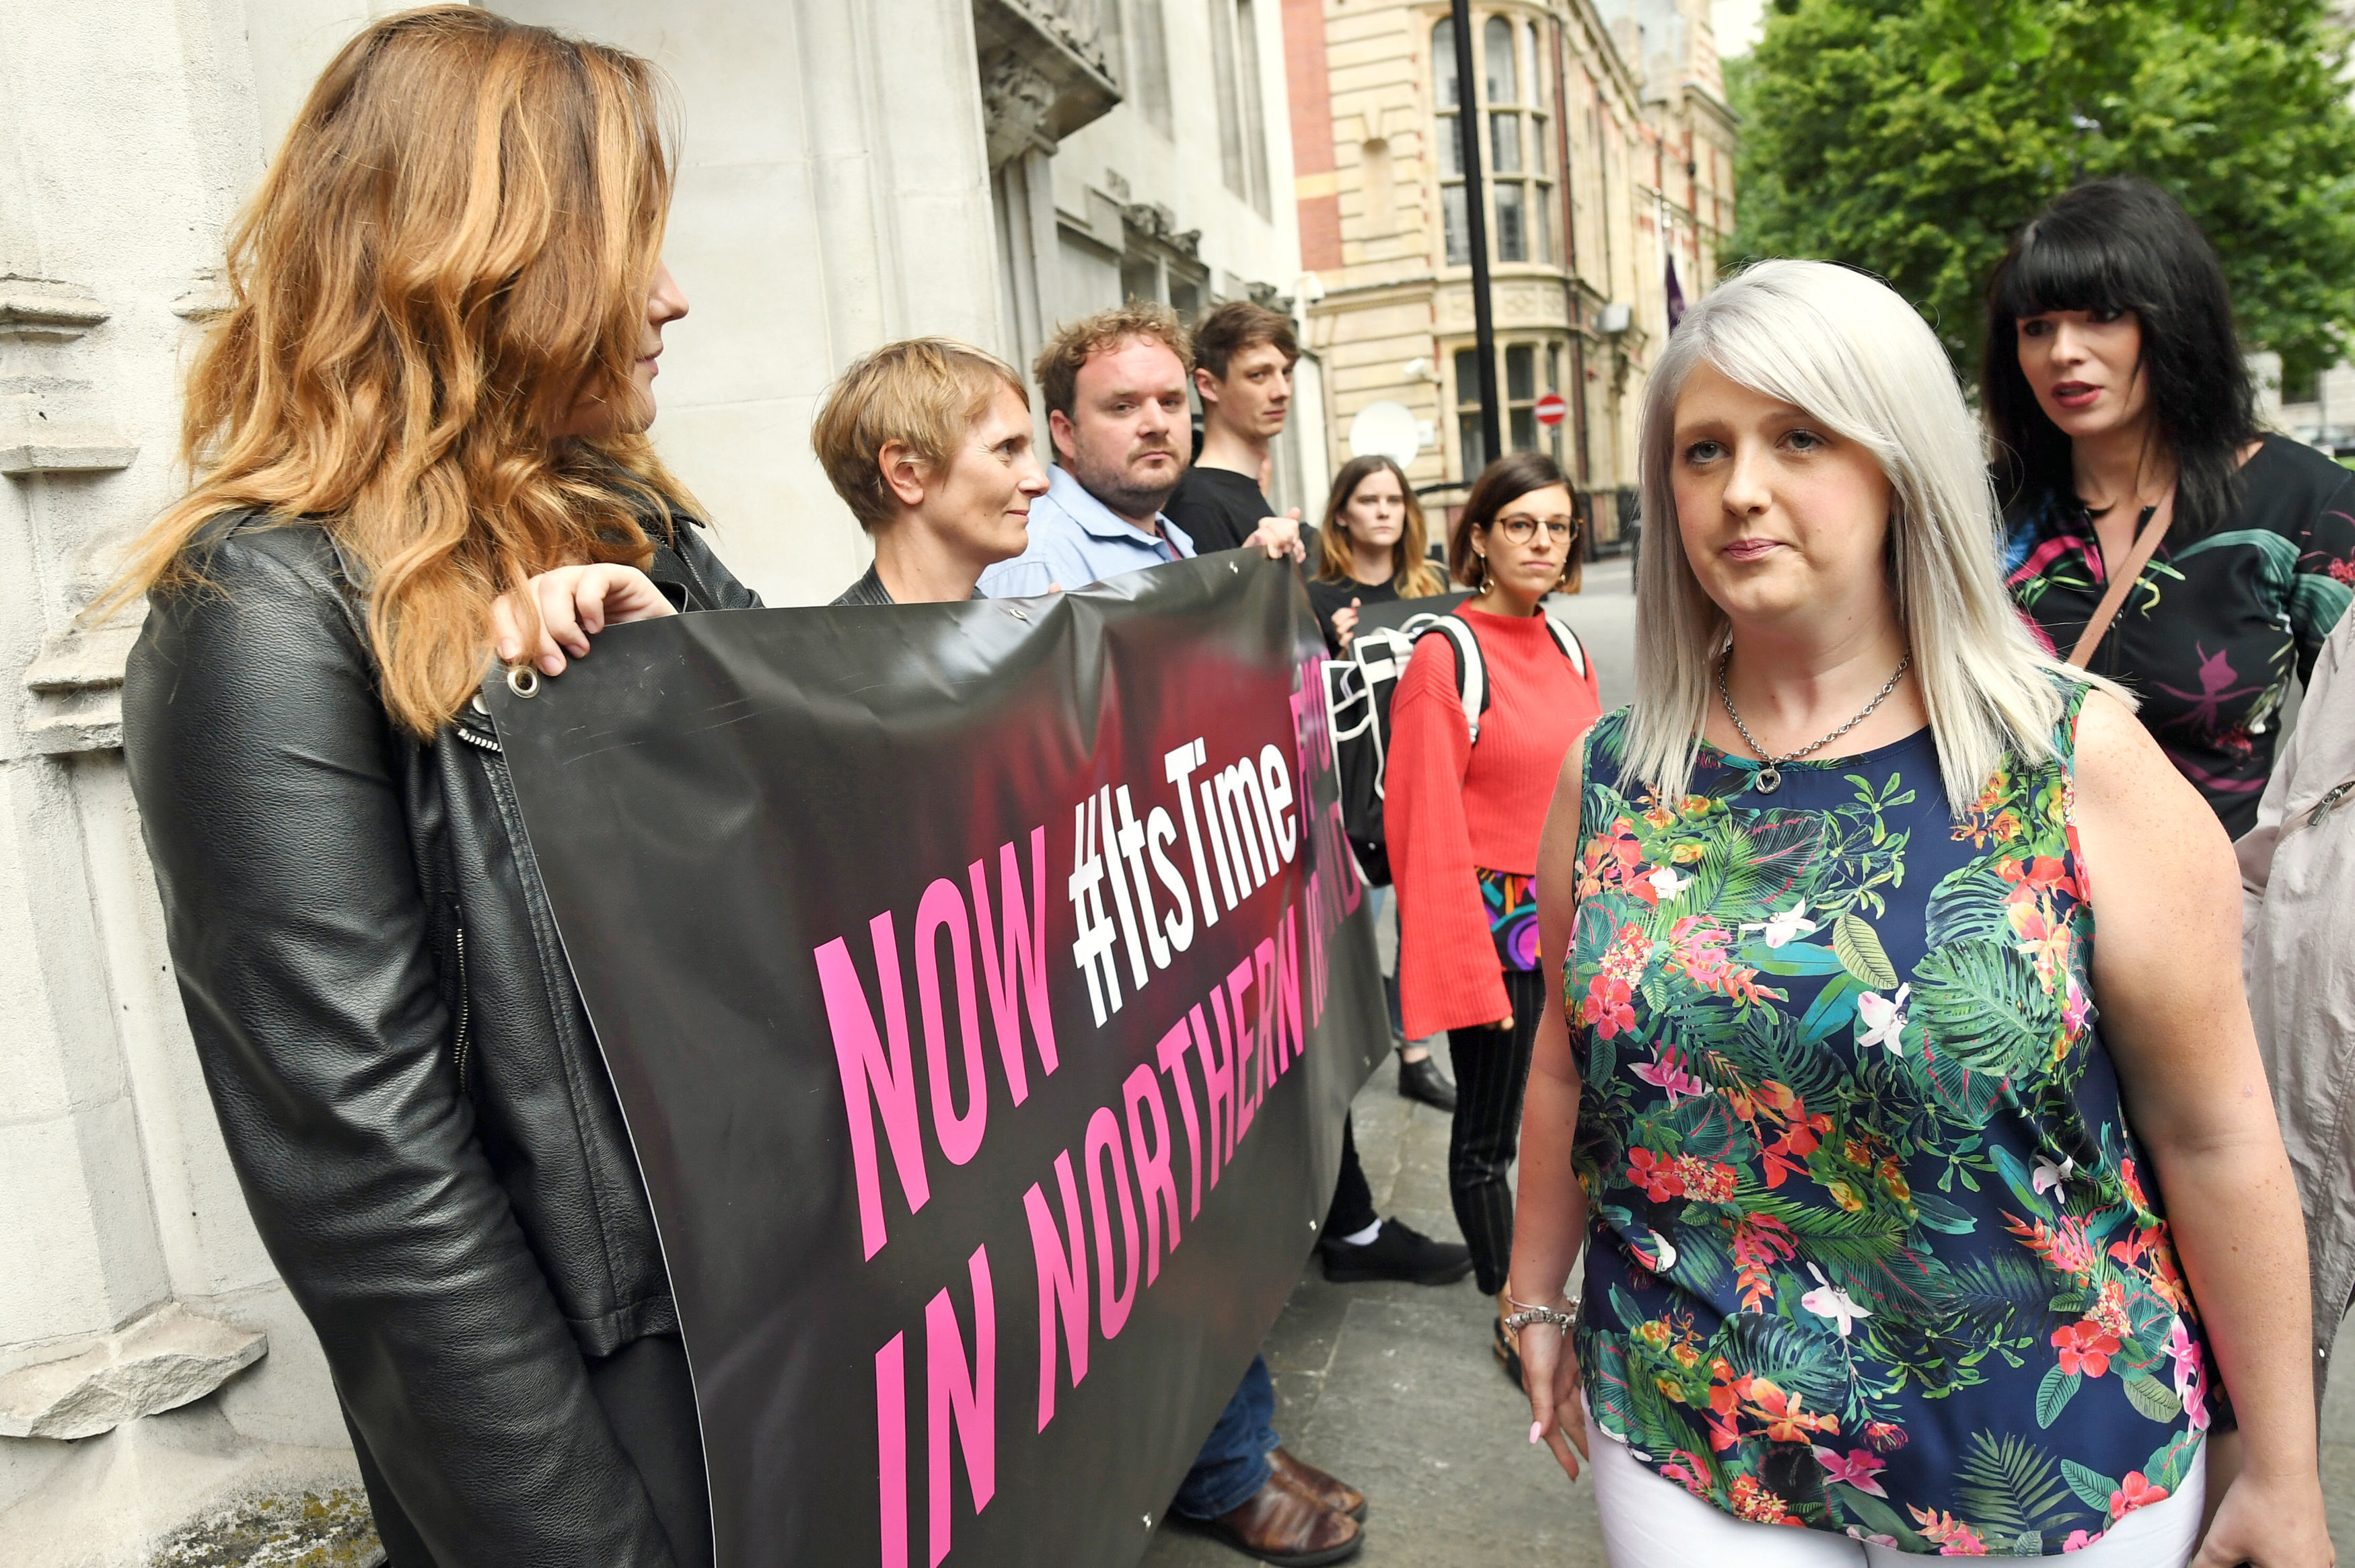 Supreme Court rules against bid to change abortion law in Northern Ireland